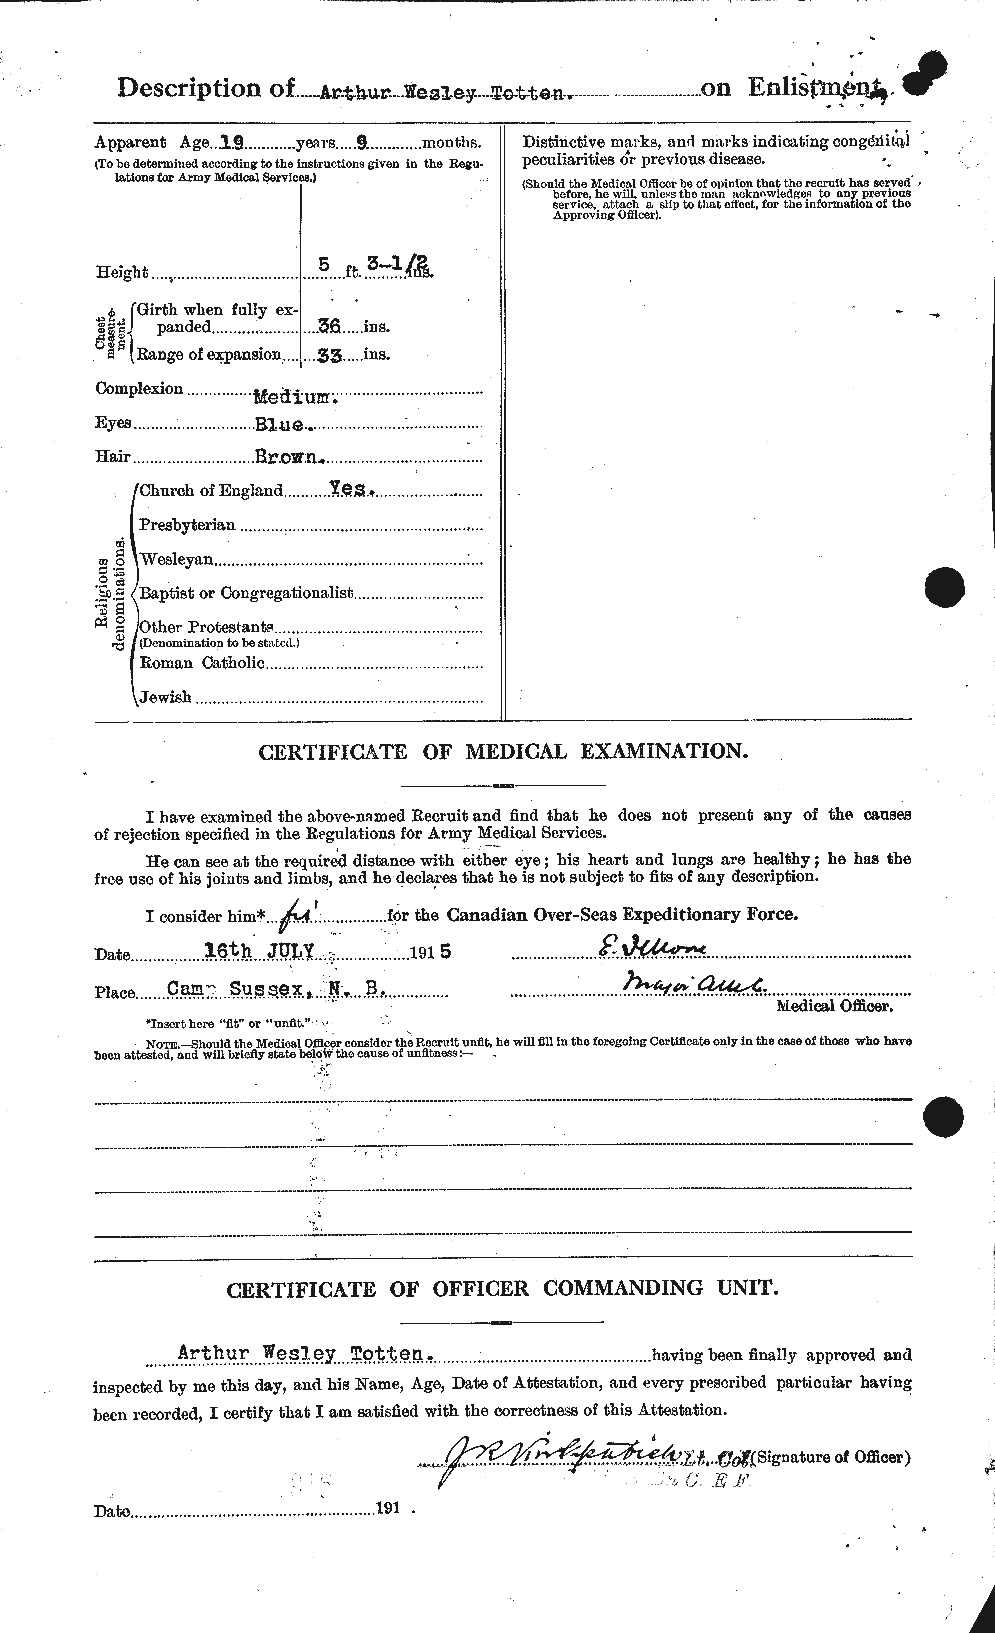 Personnel Records of the First World War - CEF 650062b